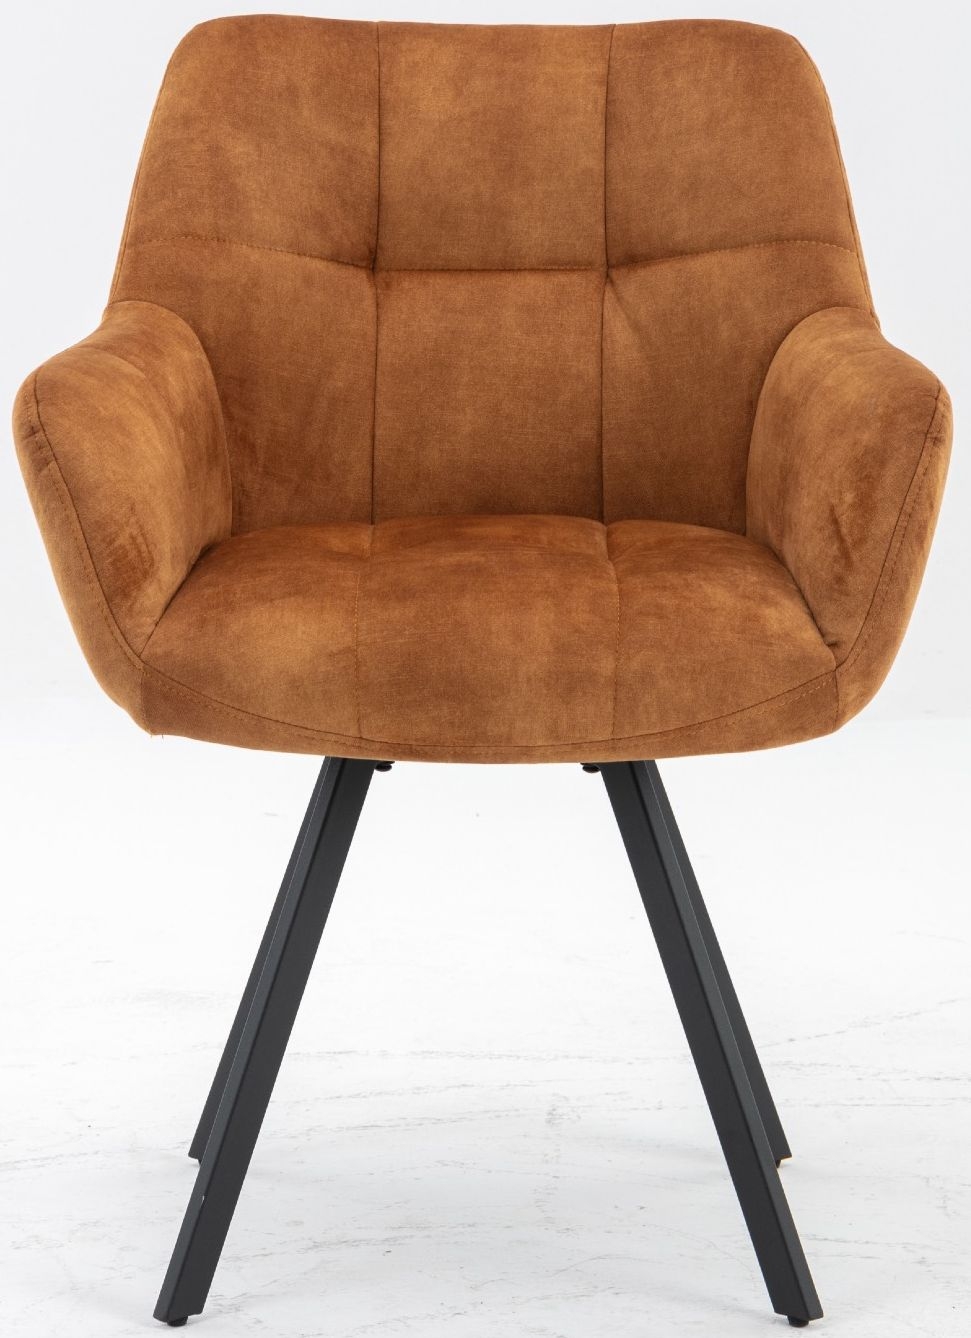 Jade Rust Dining Armchair Velvet Fabric Upholstered Sold In Pairs